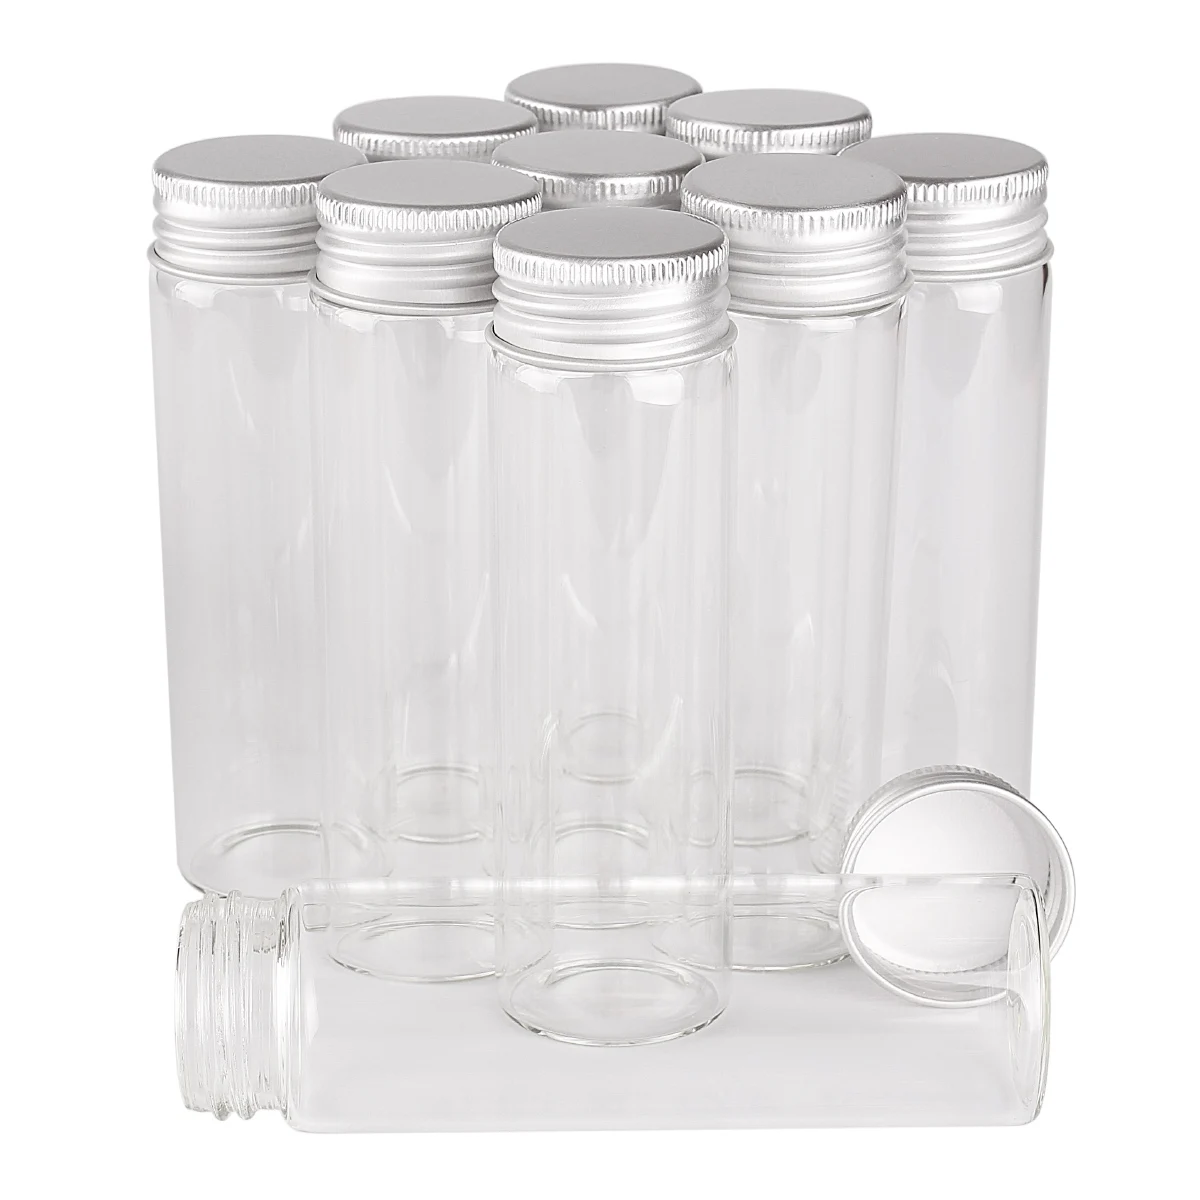 48 Pieces 50ml Glass Bottles with Aluminum Lids 30*100mm Glass Jars for Wedding Crafts Gift